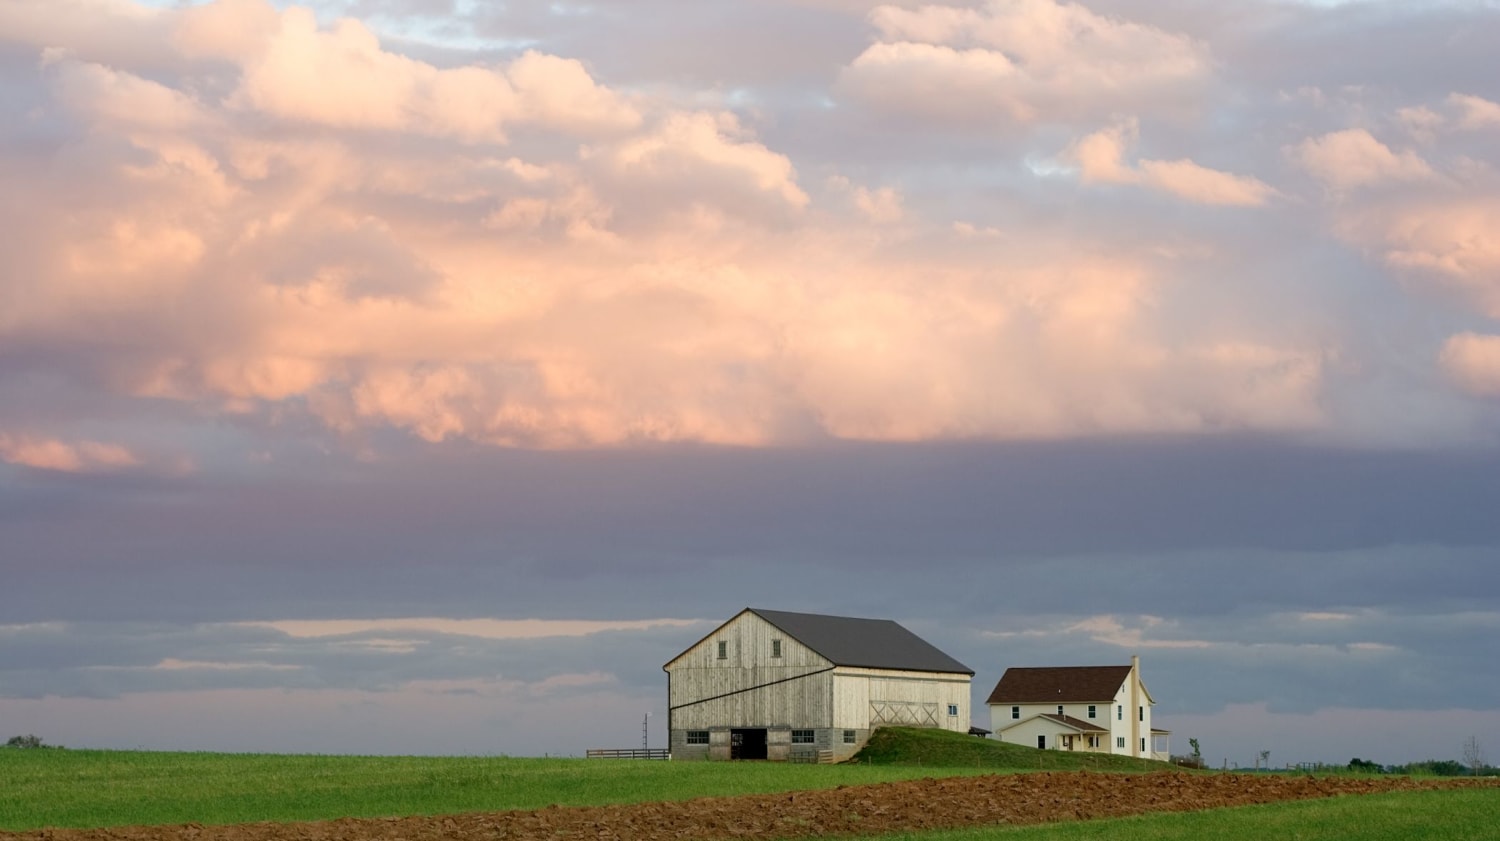 Why Are So Many Farmhouses Painted White?